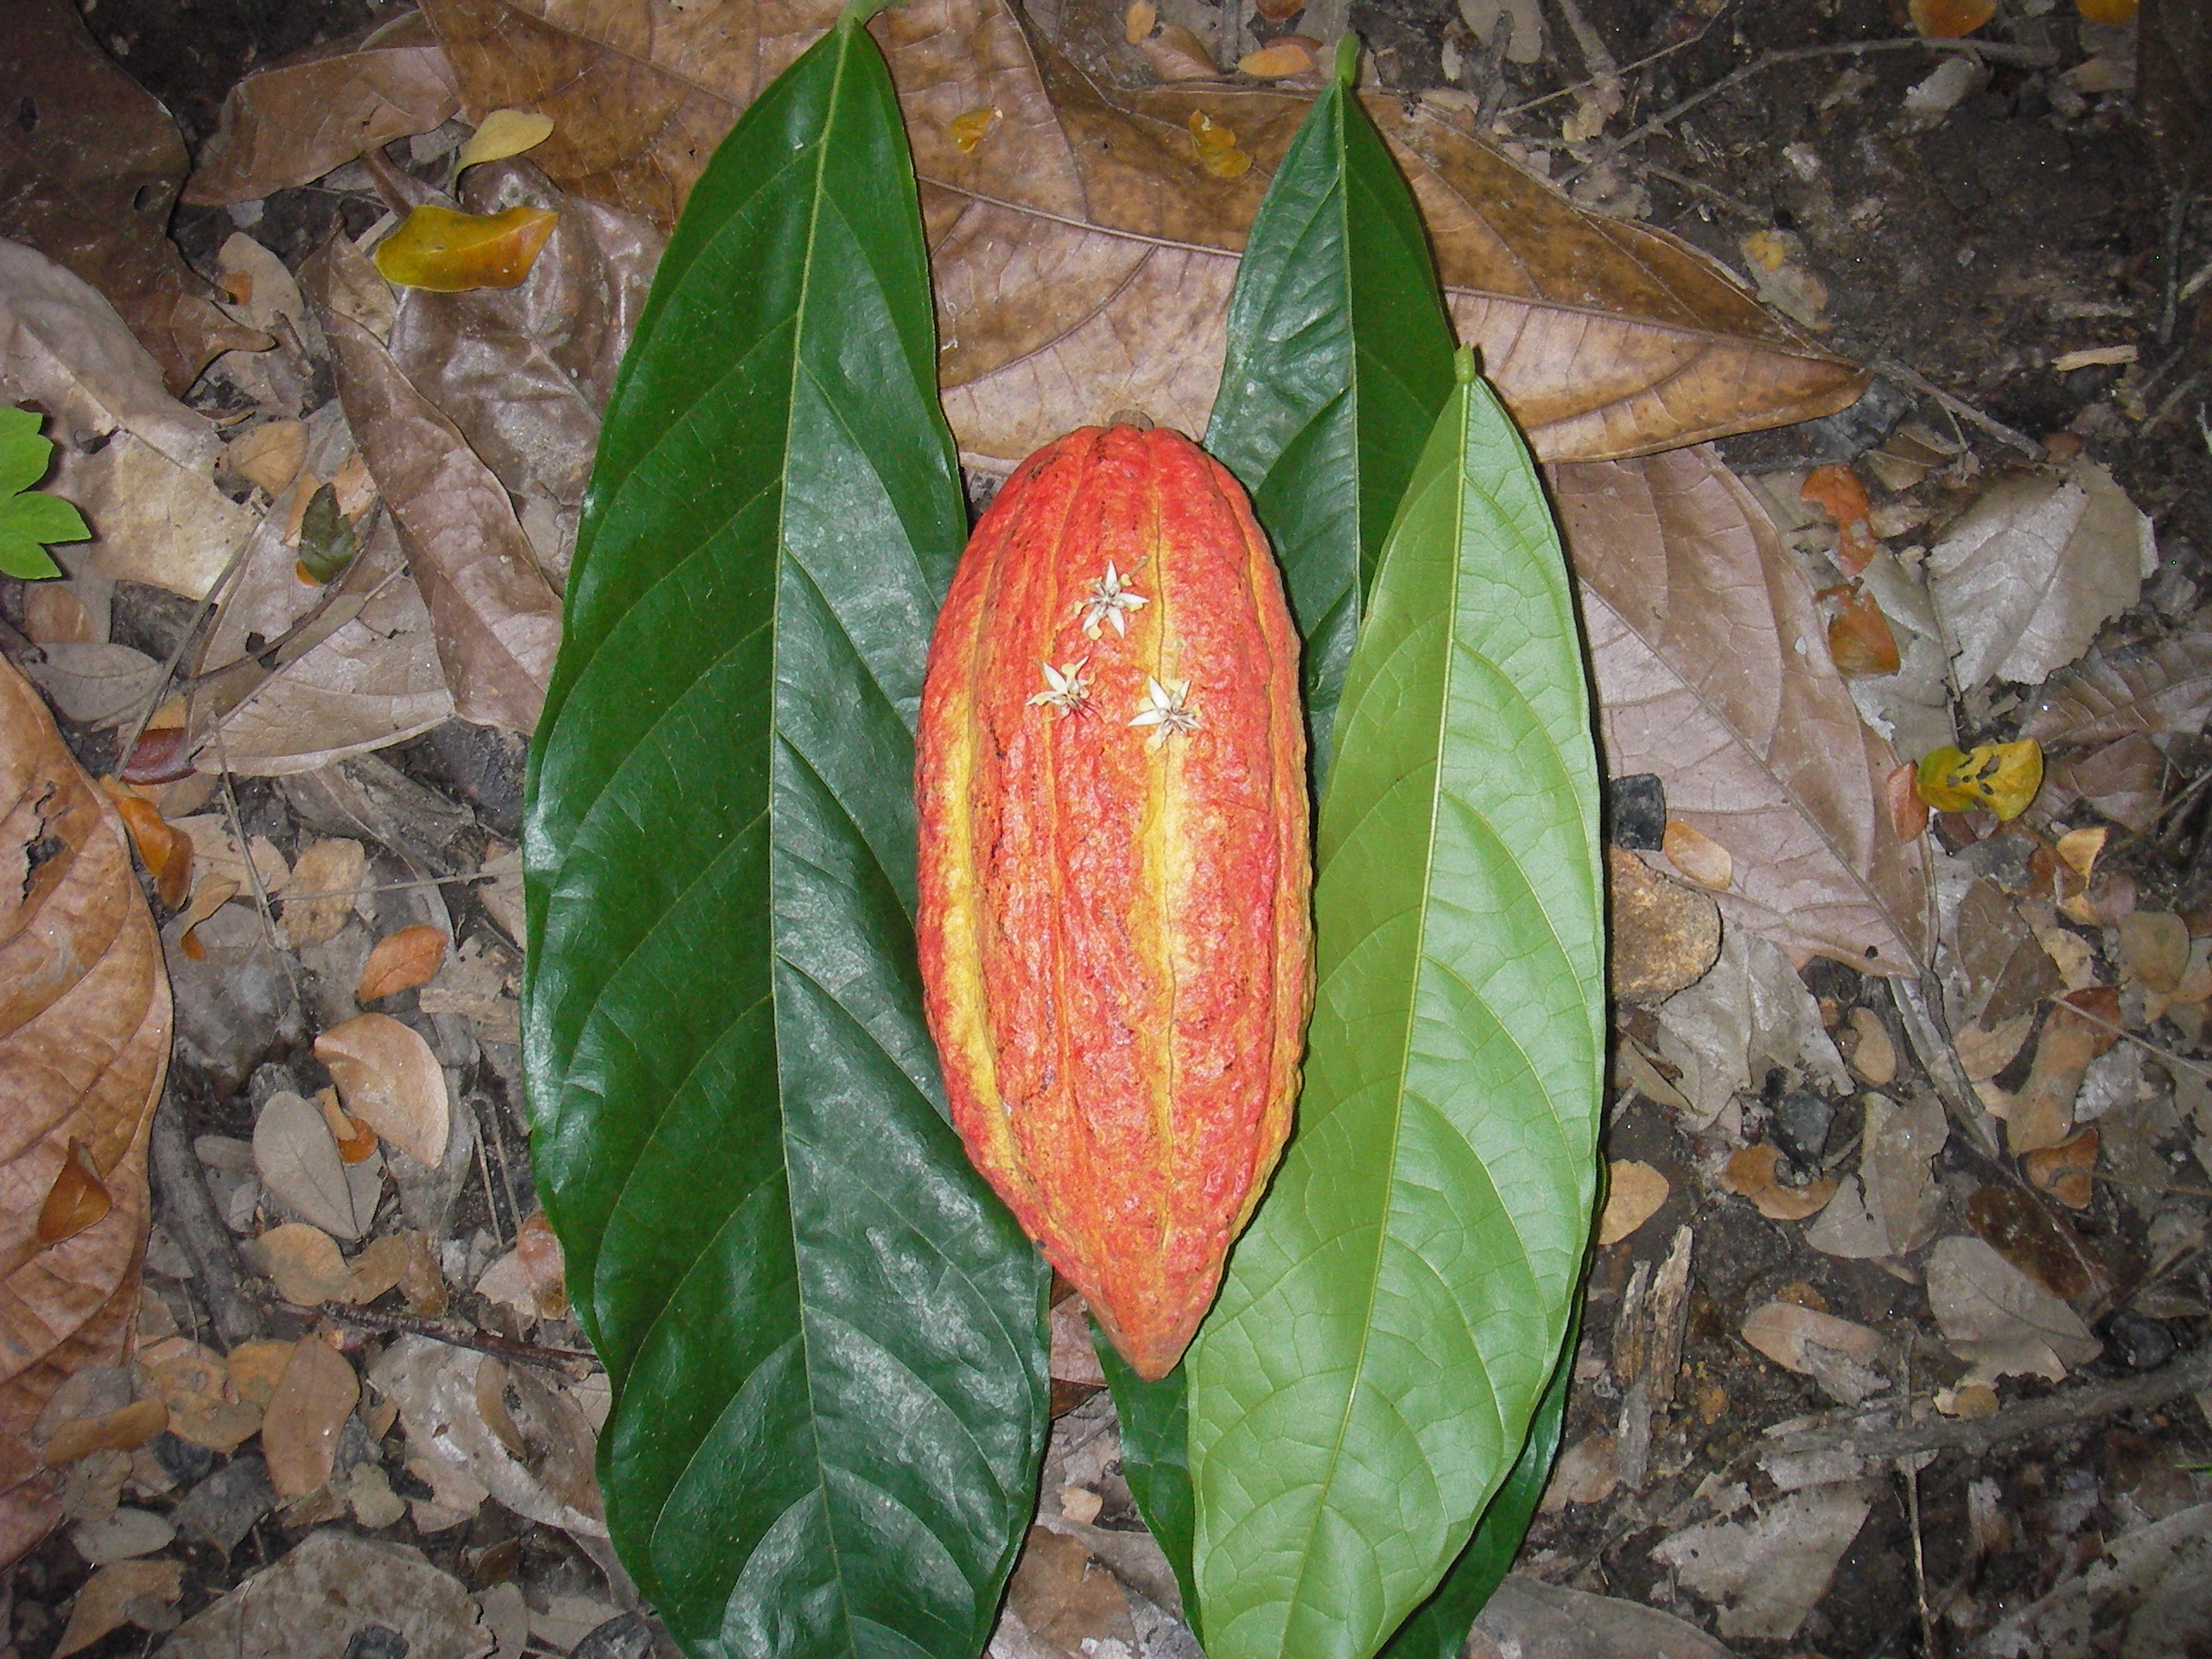 Leaves and pods